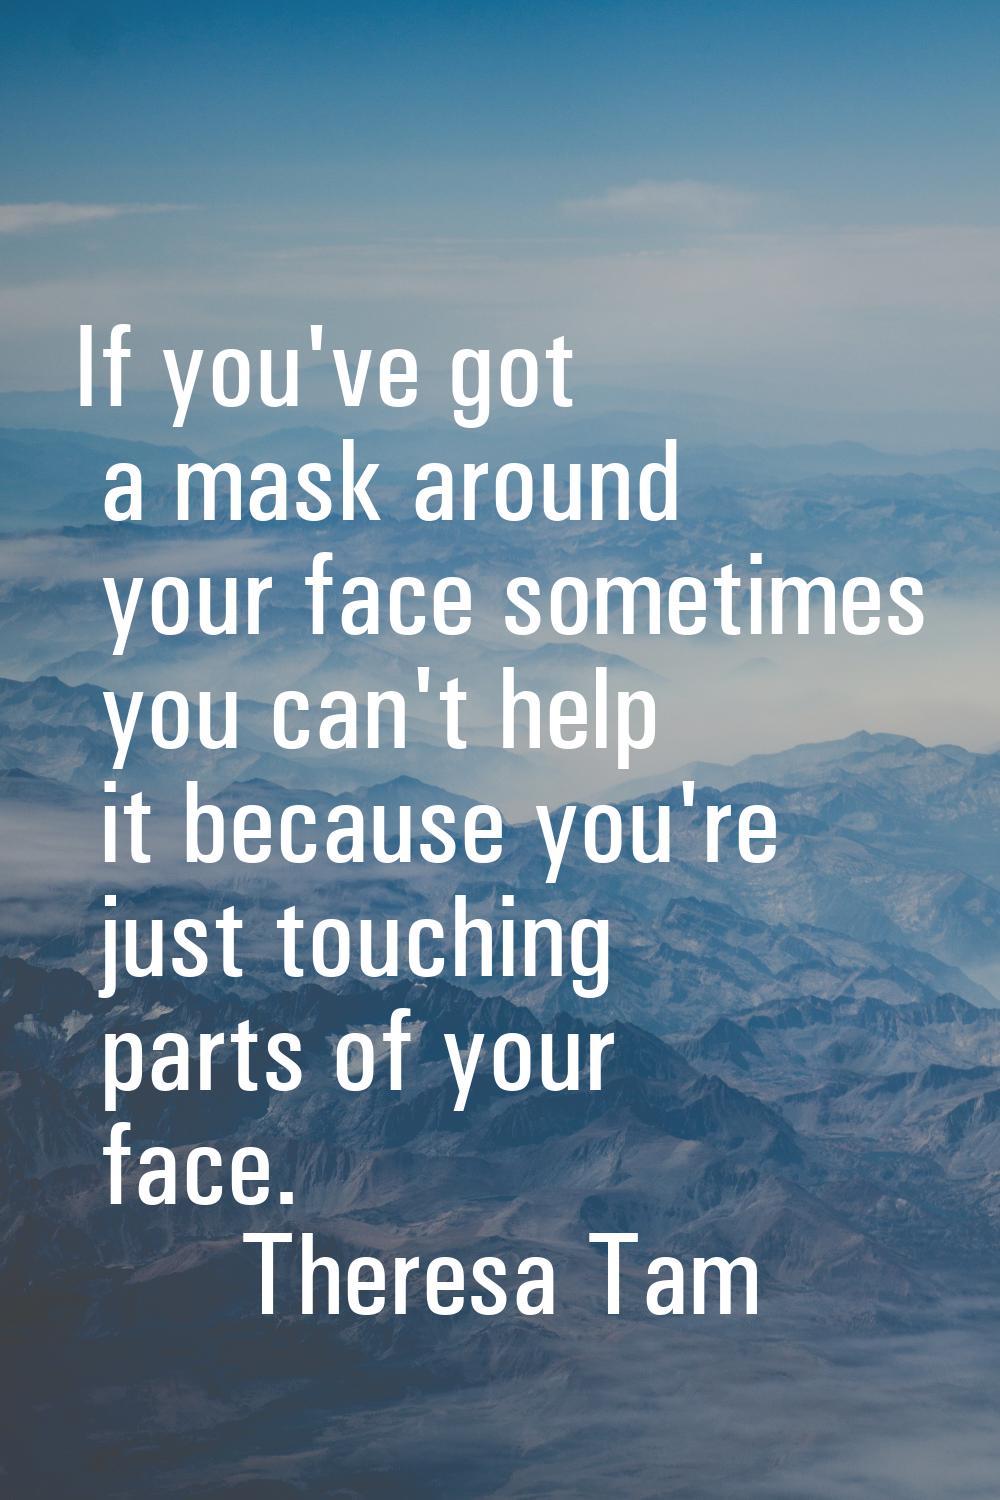 If you've got a mask around your face sometimes you can't help it because you're just touching part